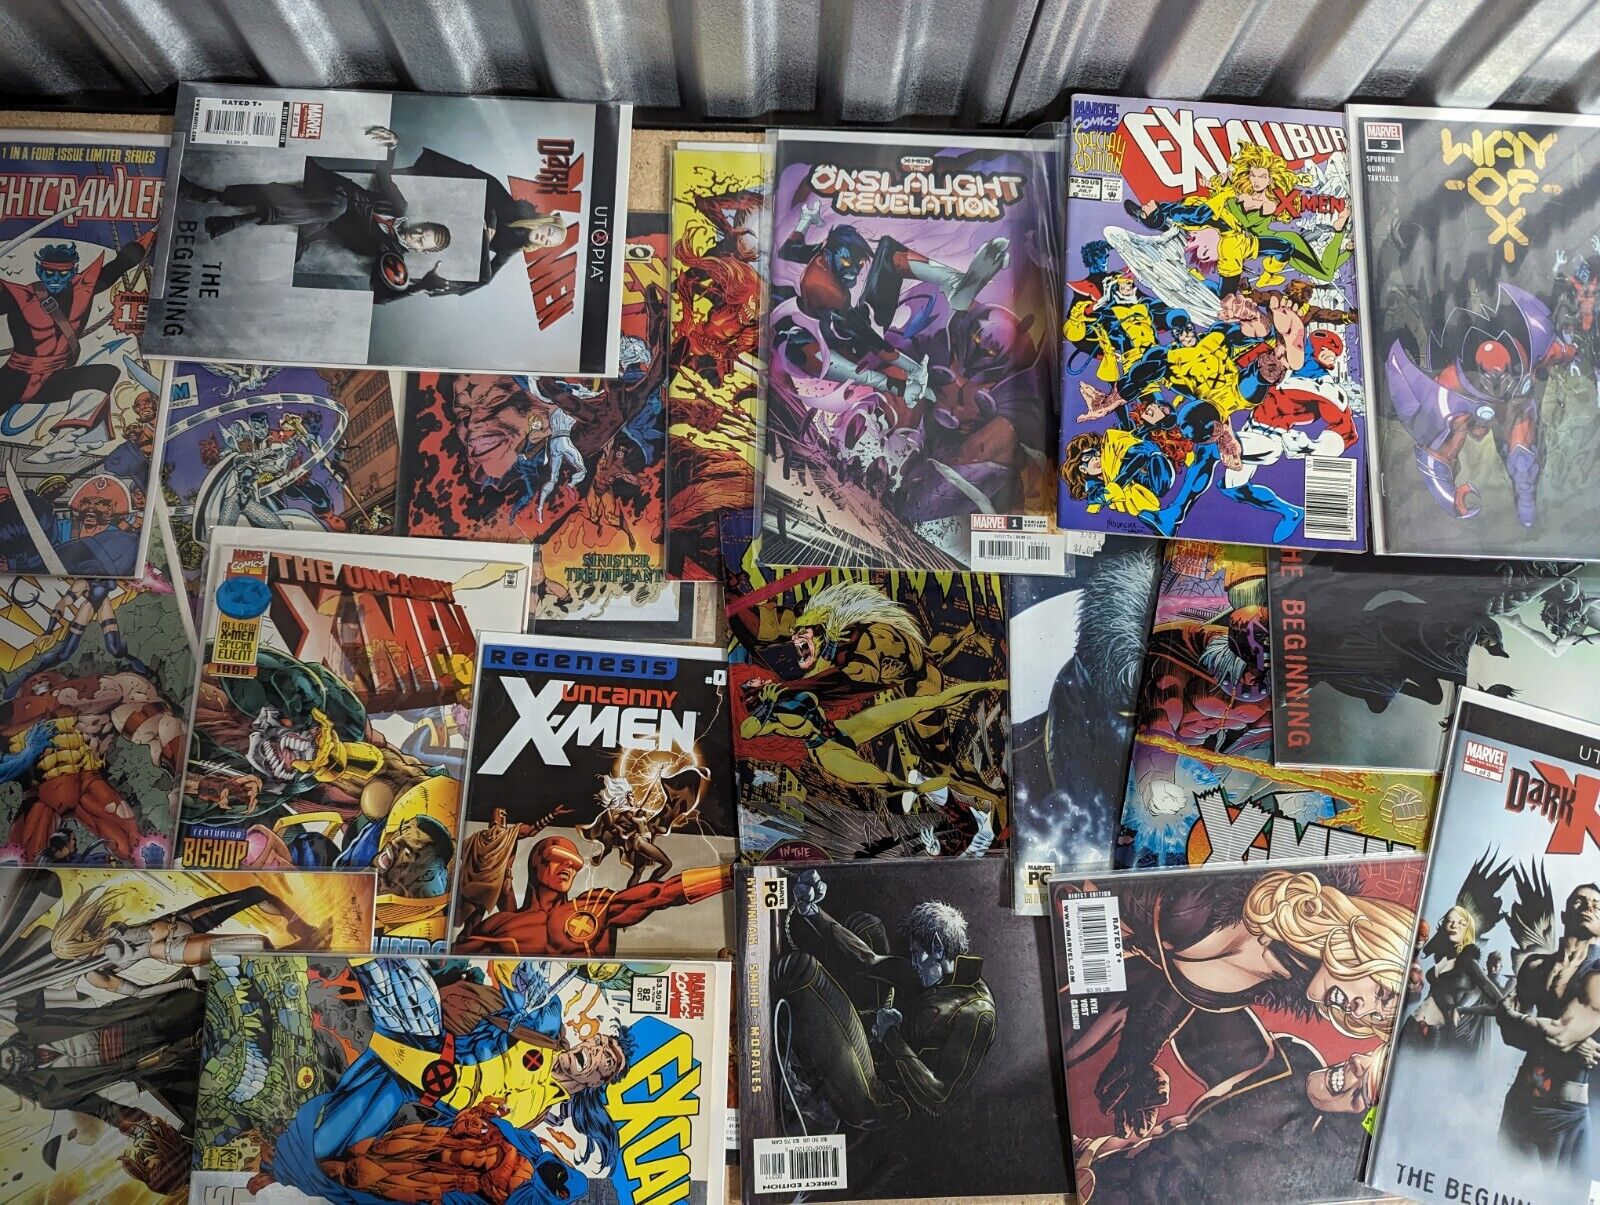 LOT OF 10 X-Men Random Comic books - No Duplicates Boarded and Bagged